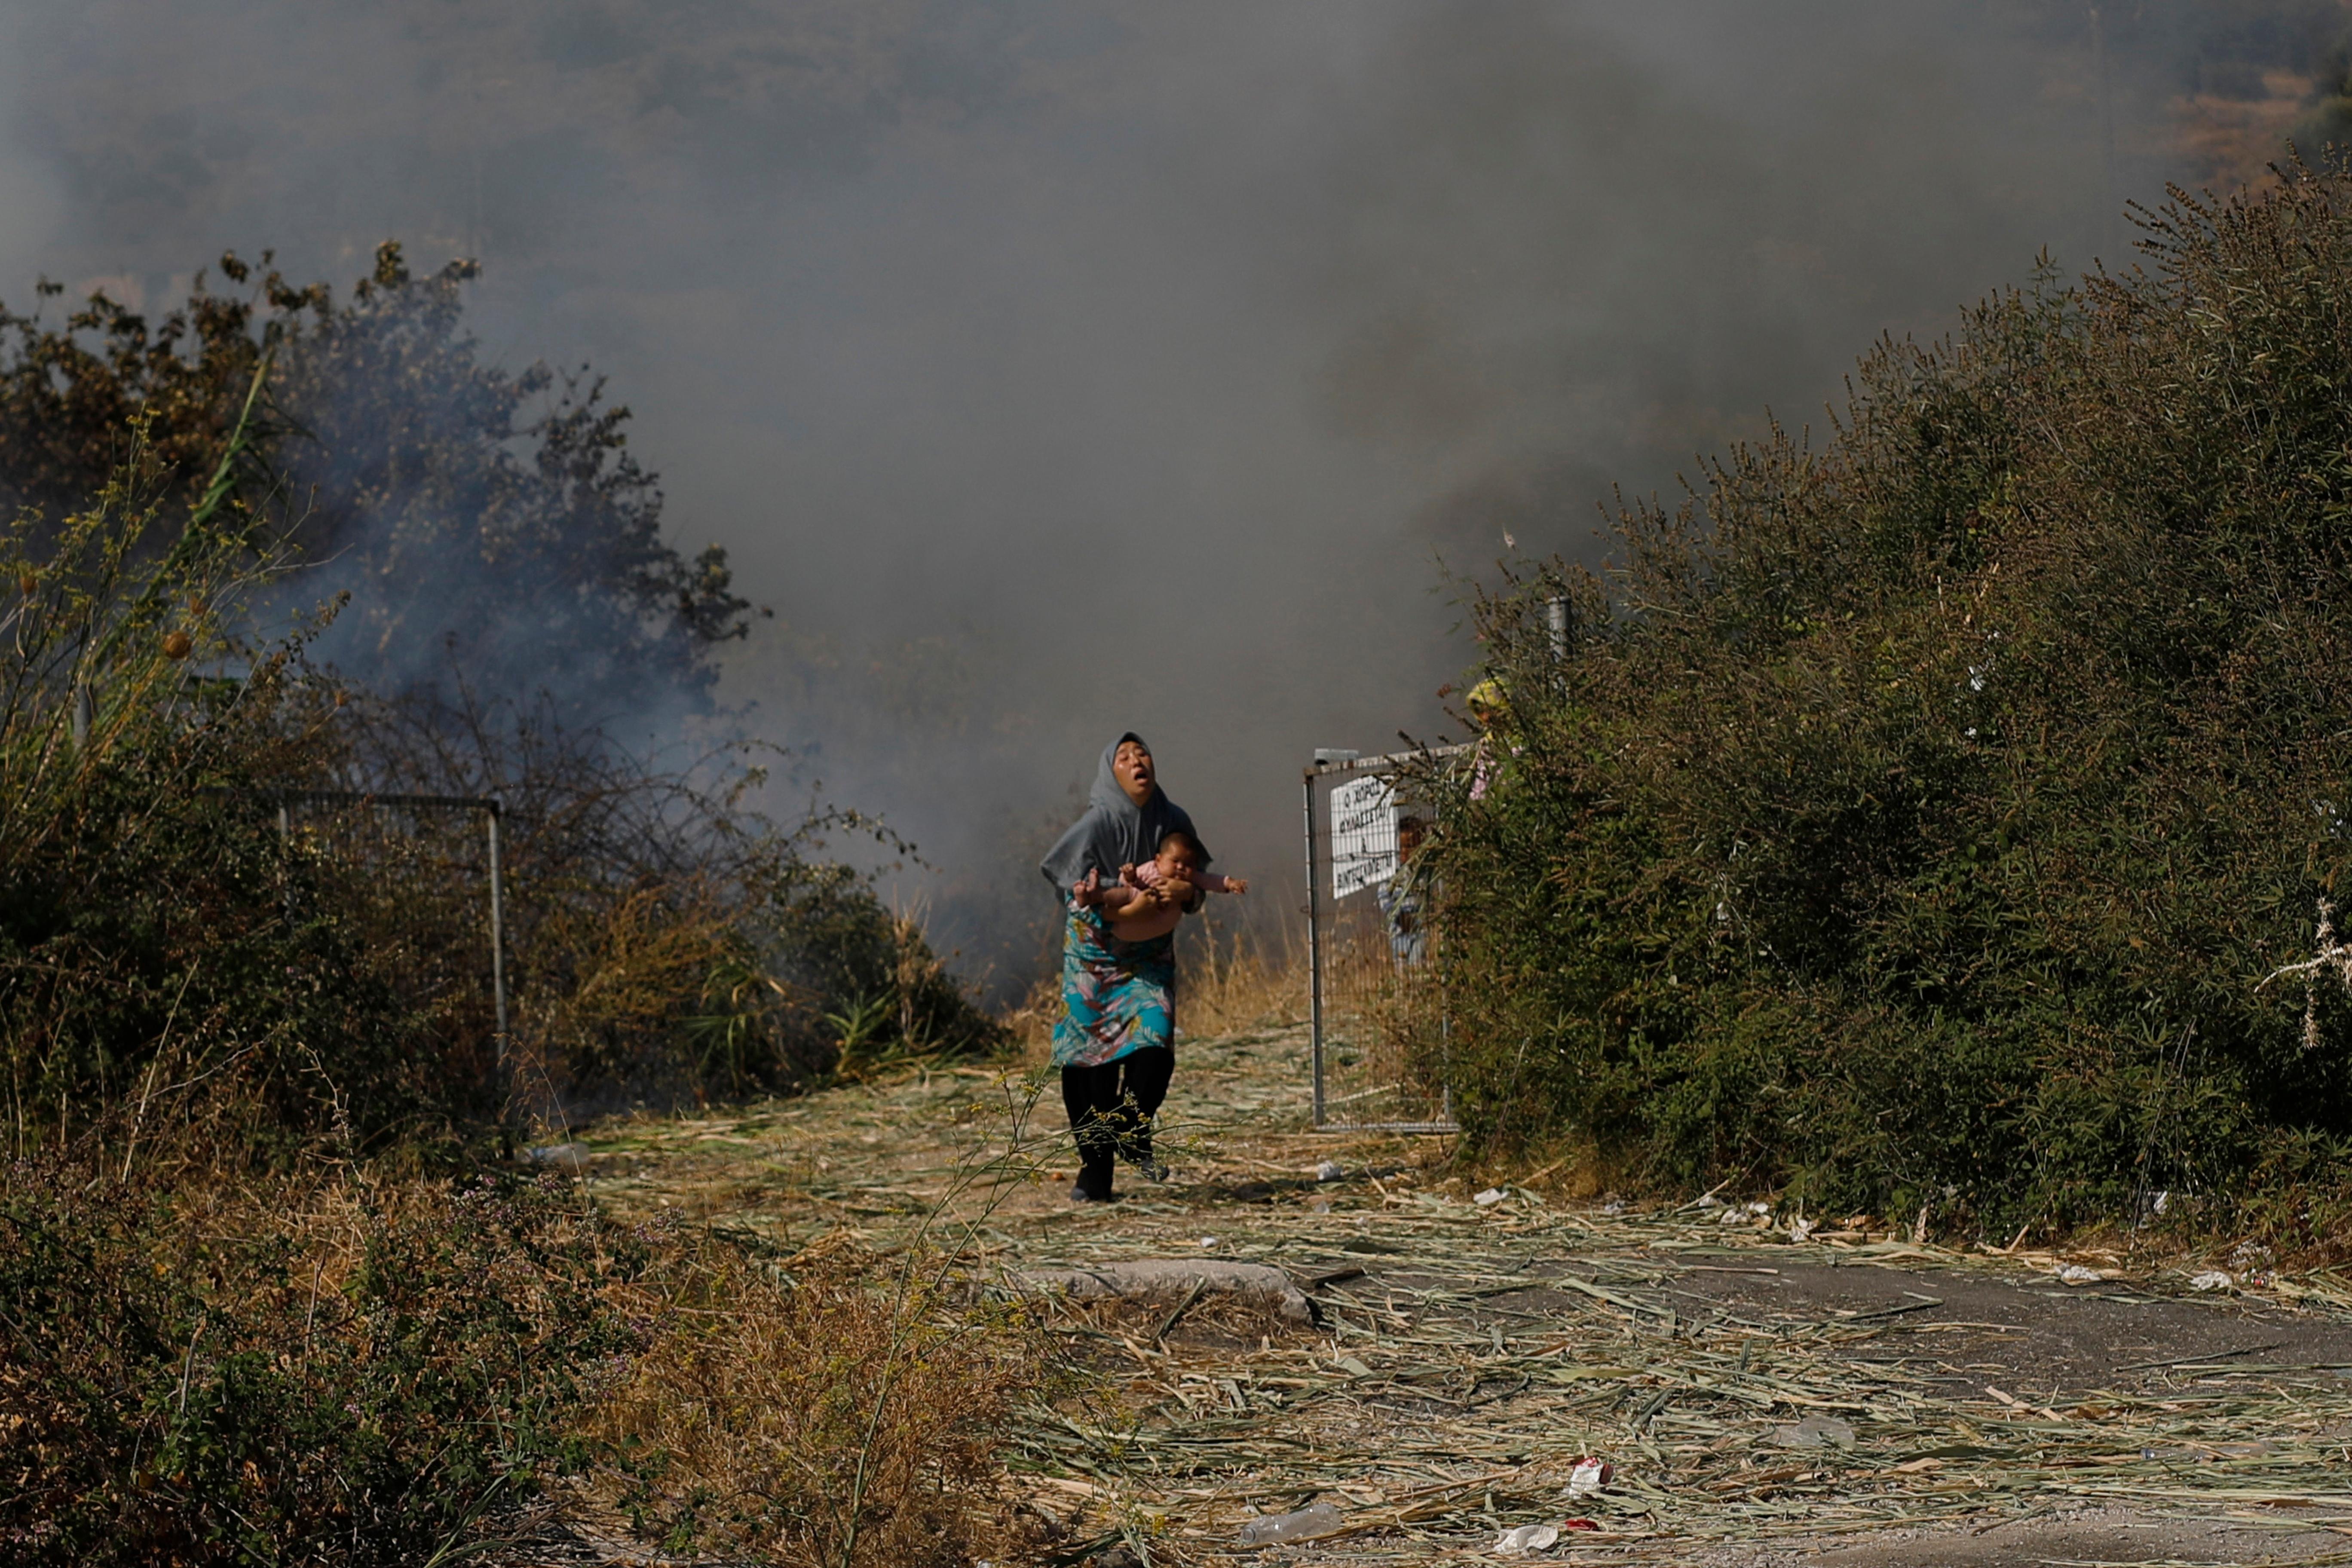 A migrant holds her baby as she runs to avoid a small fire in a field near Mytilene town, on the northeastern island of Lesbos, Greece, Saturday, Sept. 12, 2020. Greek authorities have been scrambling to find a way to house more than 12,000 people left in need of emergency shelter on the island after the fires deliberately set on Tuesday and Wednesday night gutted the Moria refugee camp. (AP Photo/Petros Giannakouris)